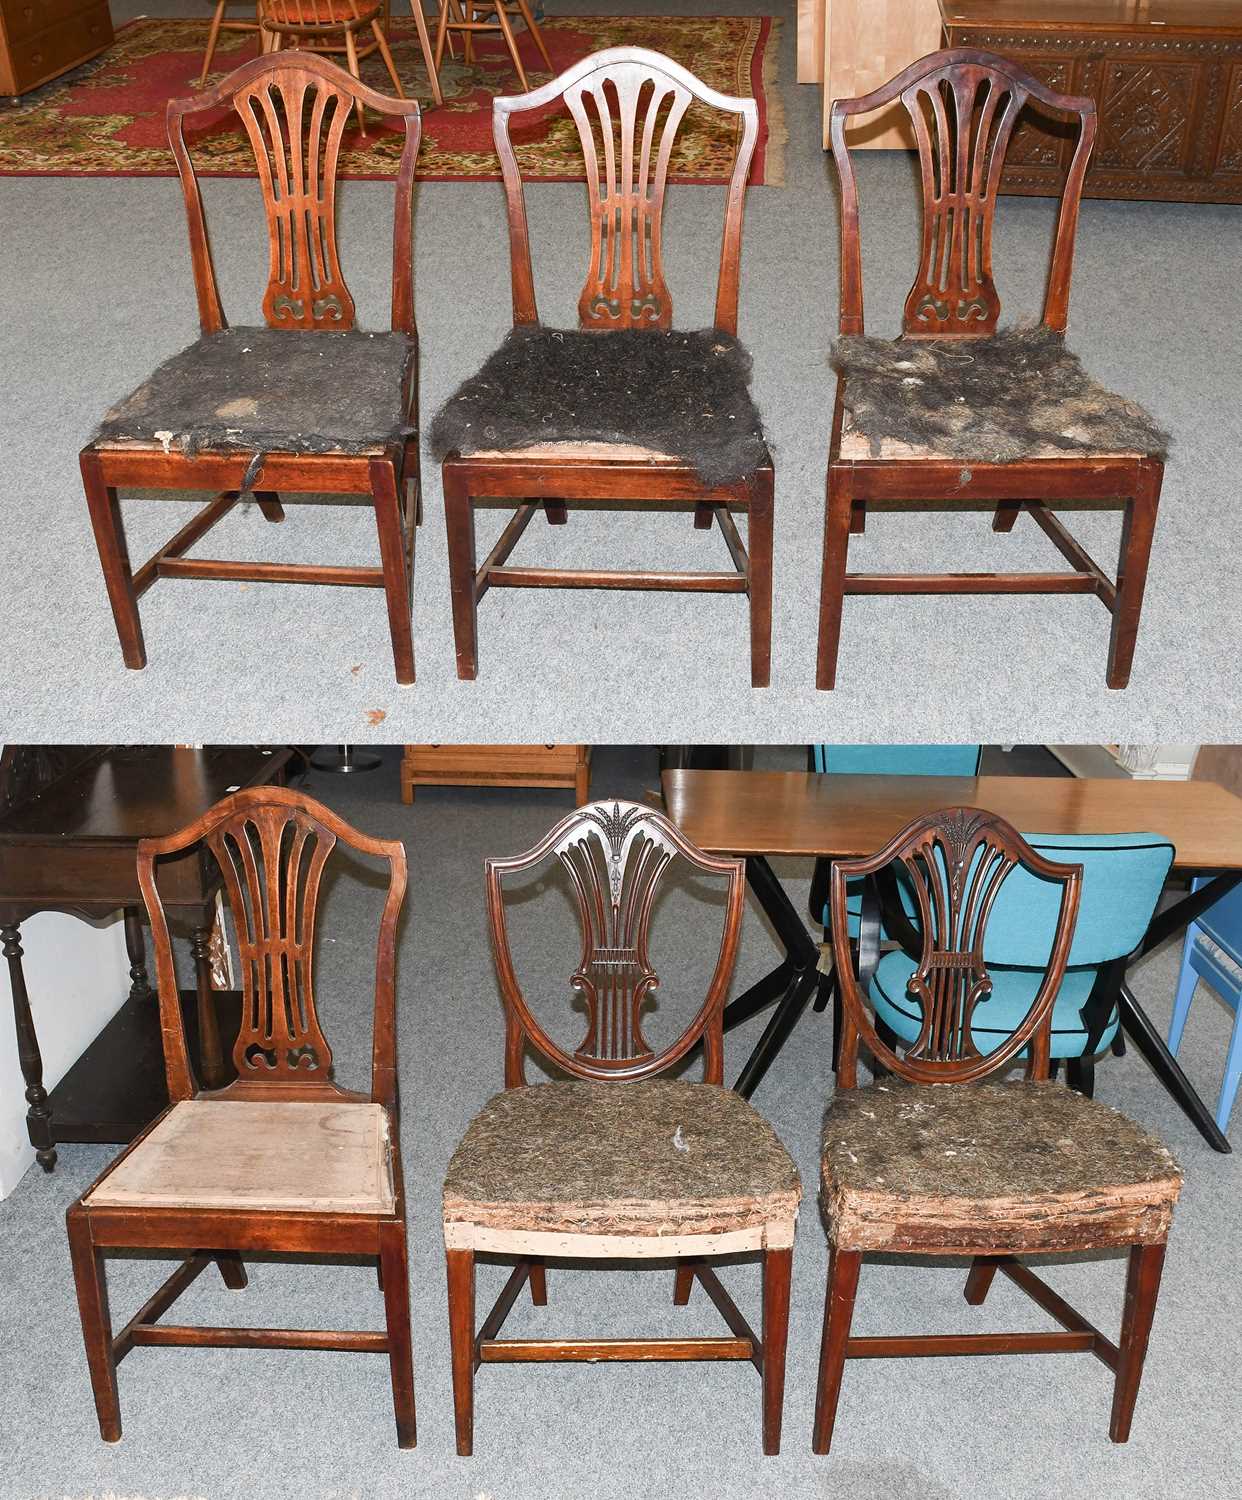 A Pair of George III Hepplewhite Style Mahogany Sheild Back Dining Chairs; together with a set of